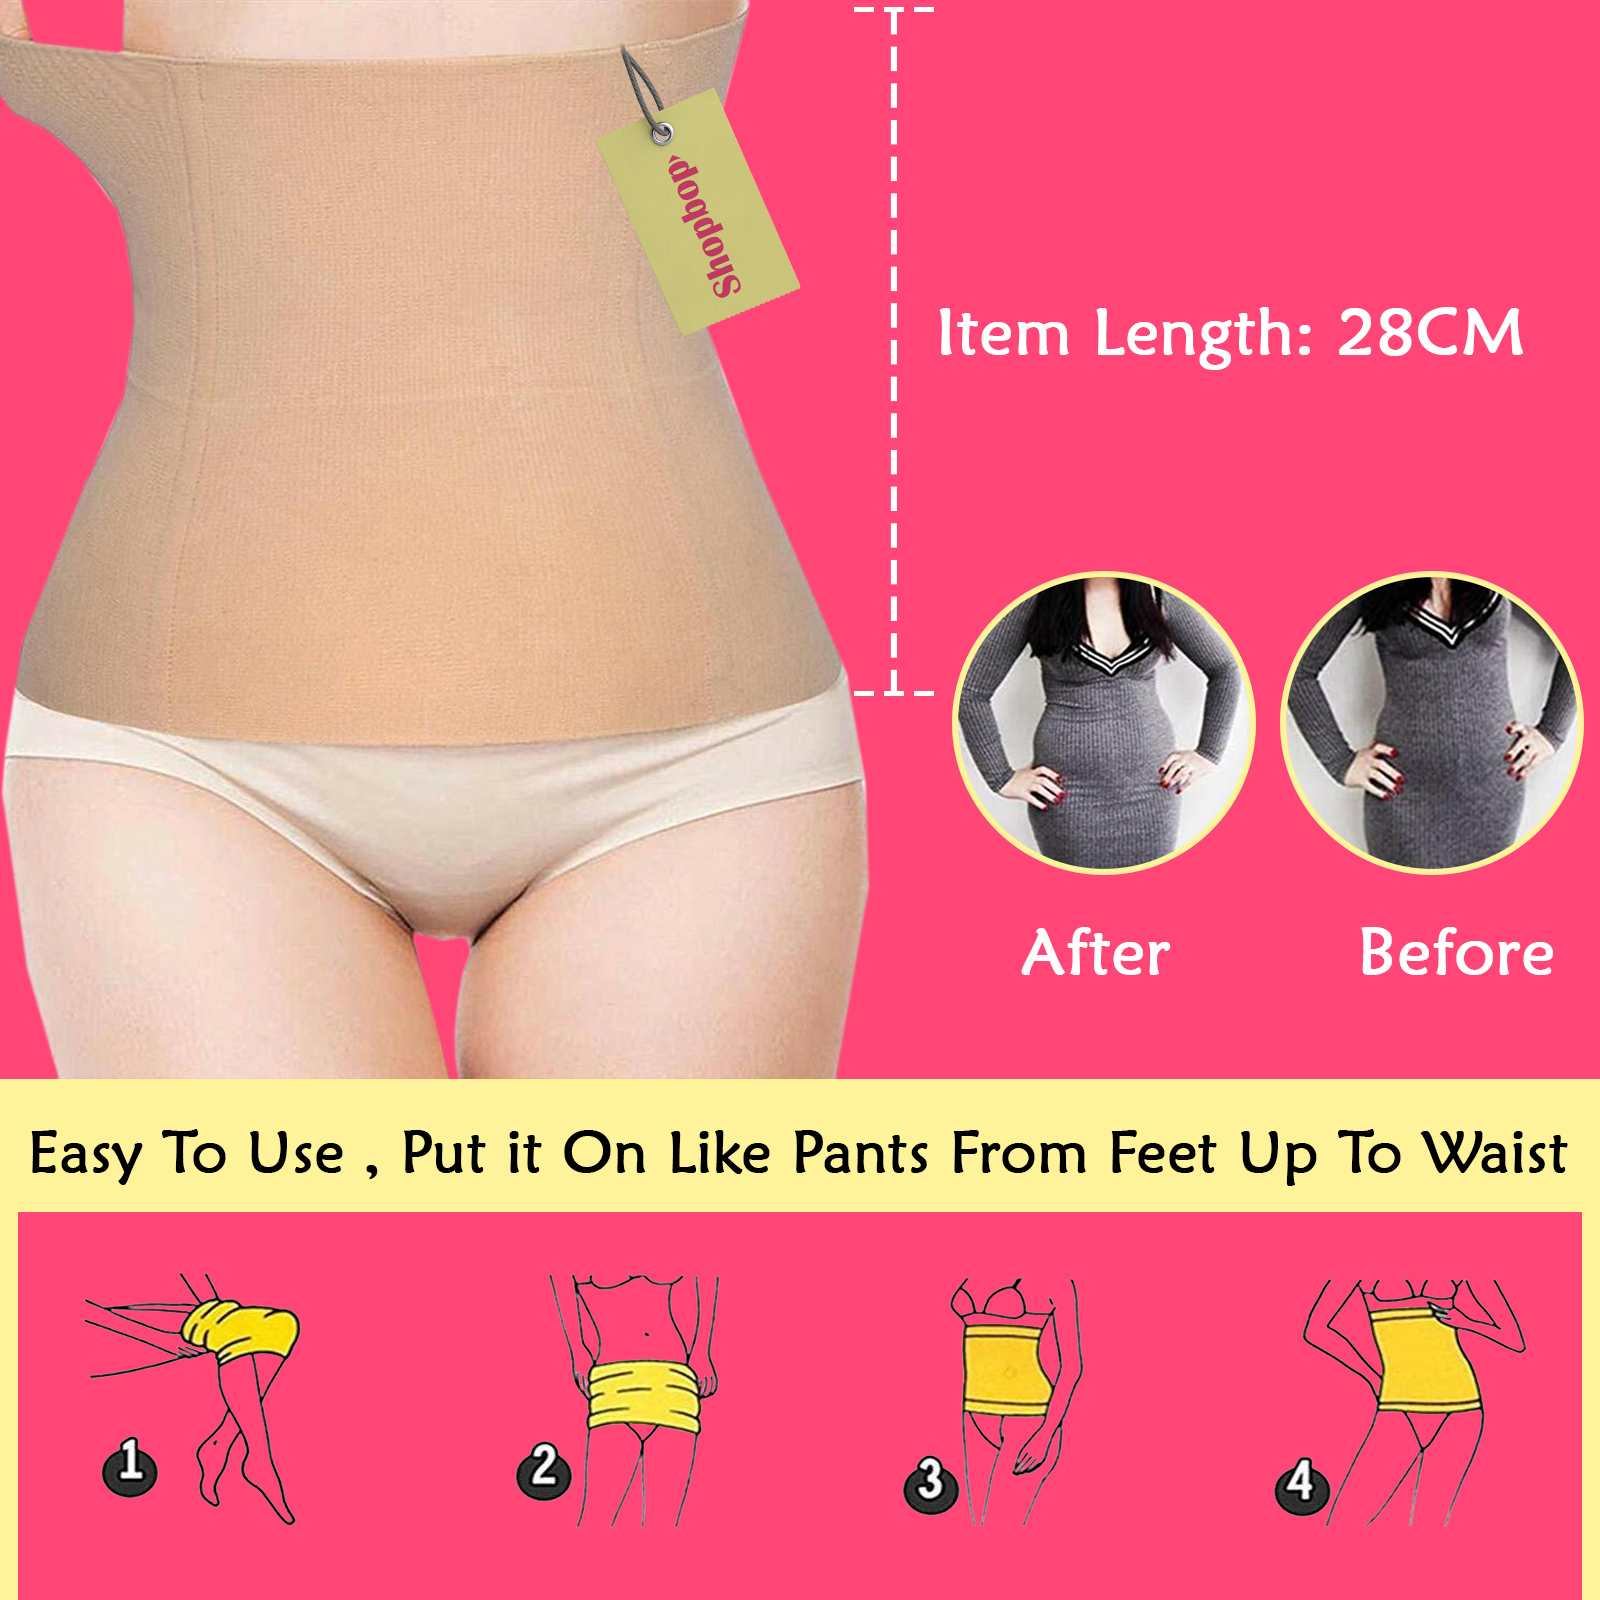 SHOPBOP Belly Recovery After Baby Tummy Tuck Belt Women Slimming